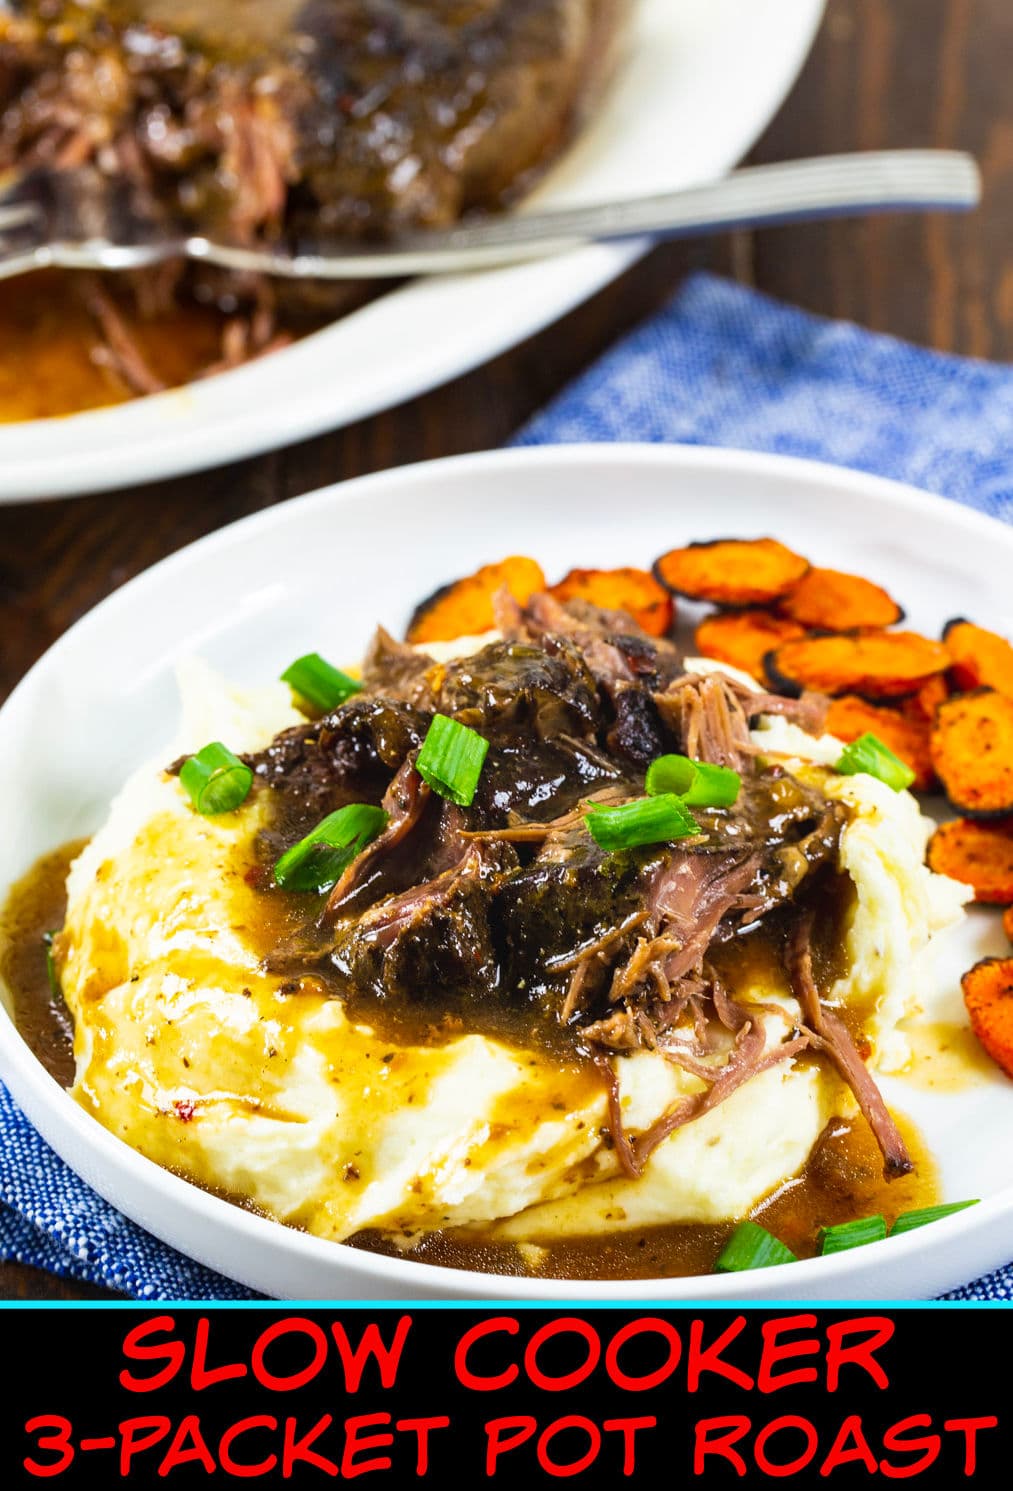 Slow Cooker 3-Packet Pot Roast over mashed potatoes.